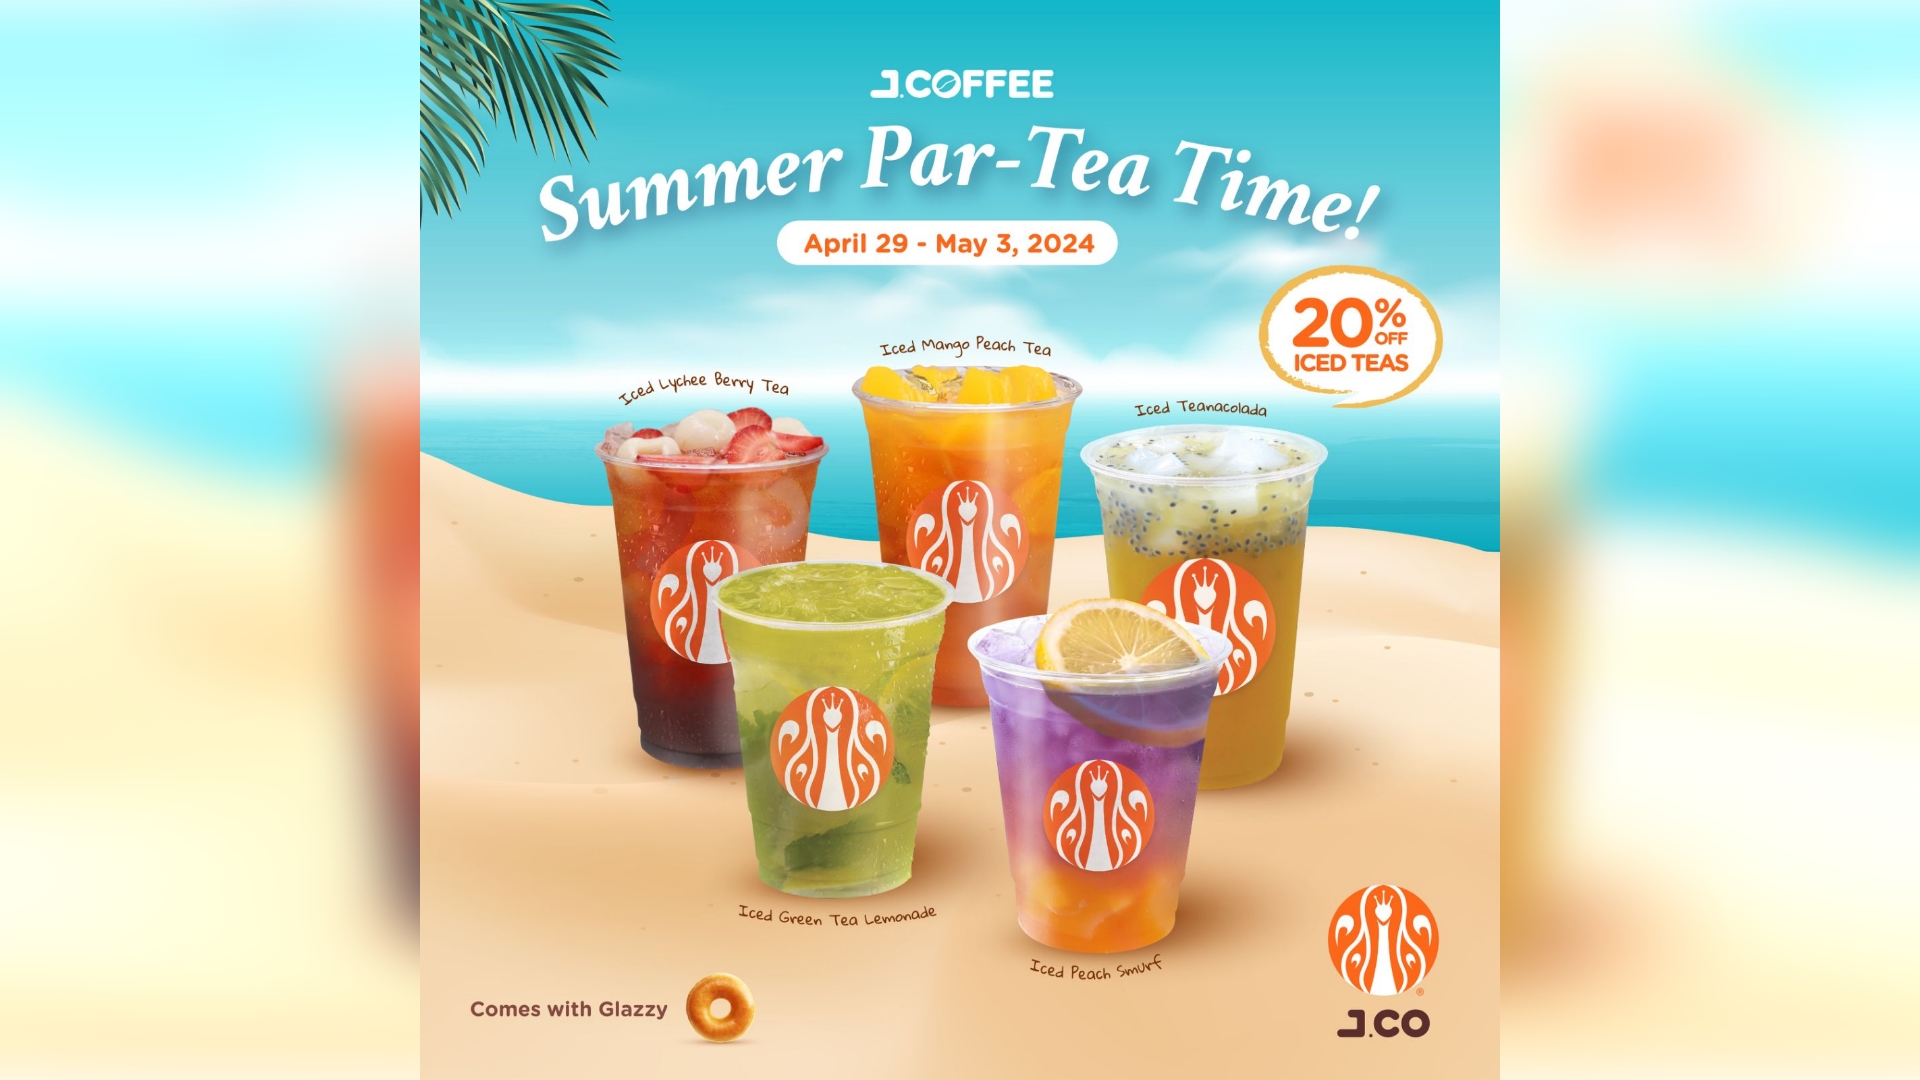 20% off iced teas at J.CO Donuts & Coffee